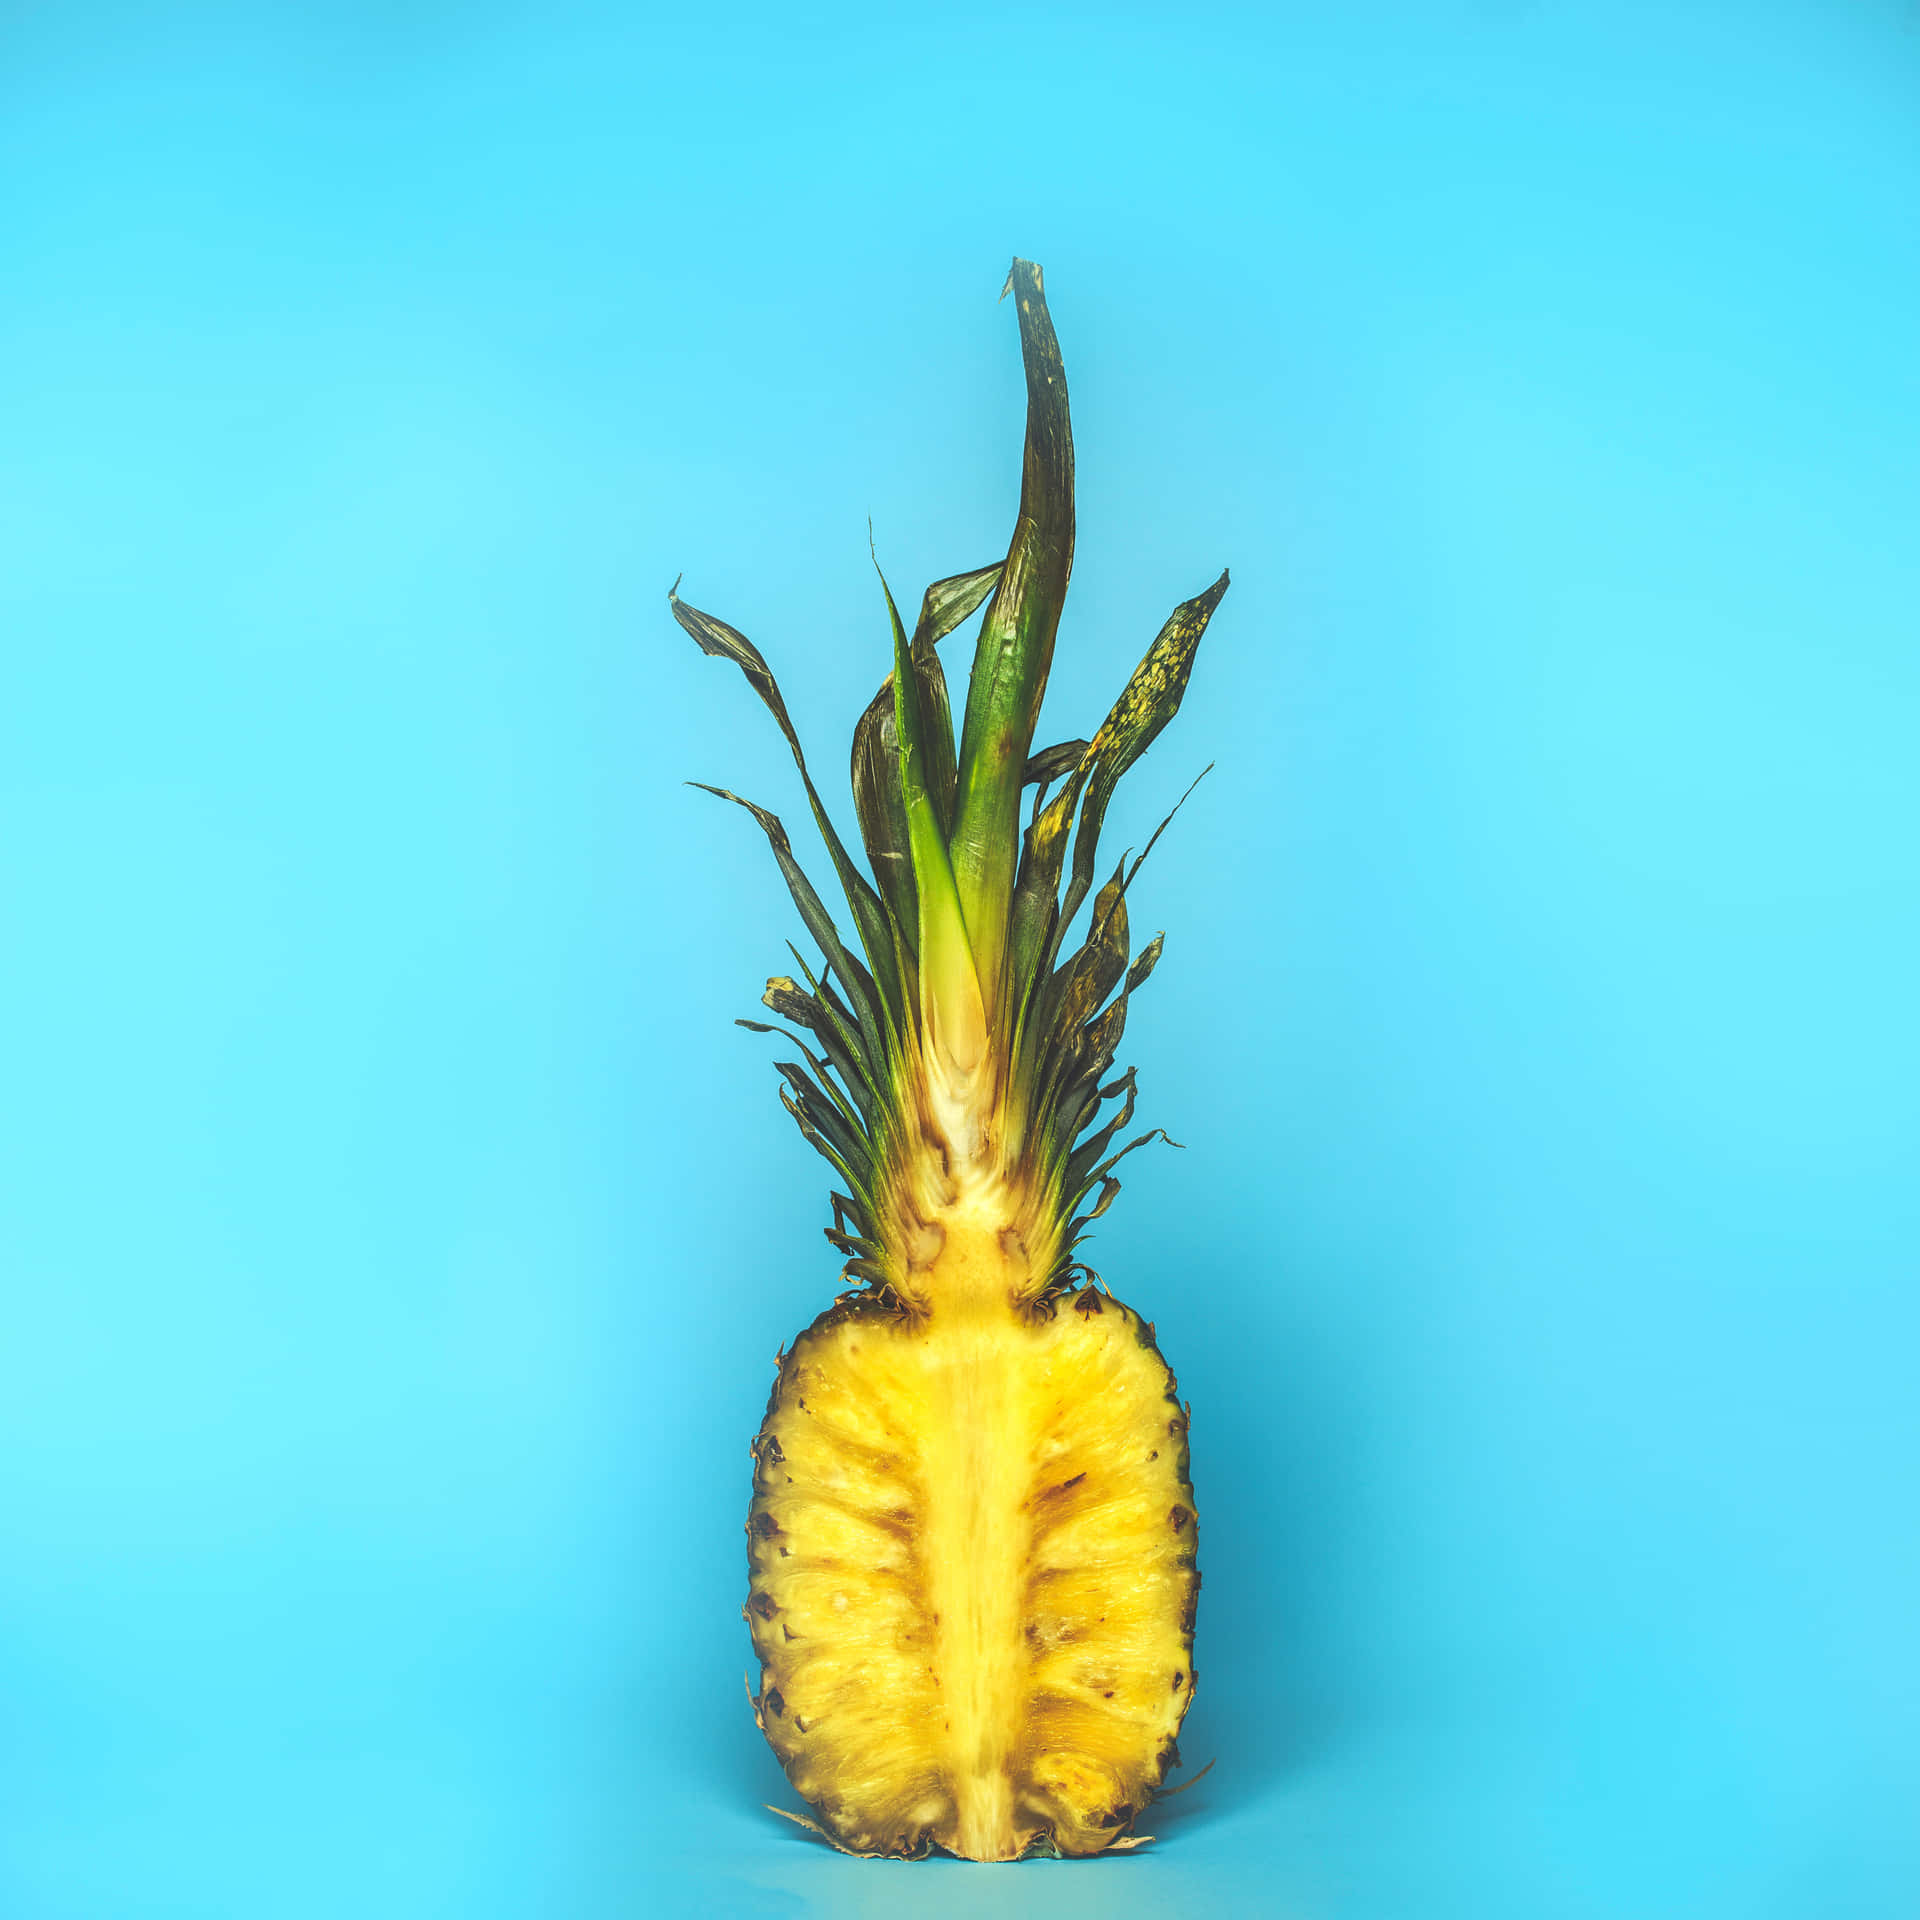 Nature's sweetest treat: A vibrant pineapple on a sunny day.